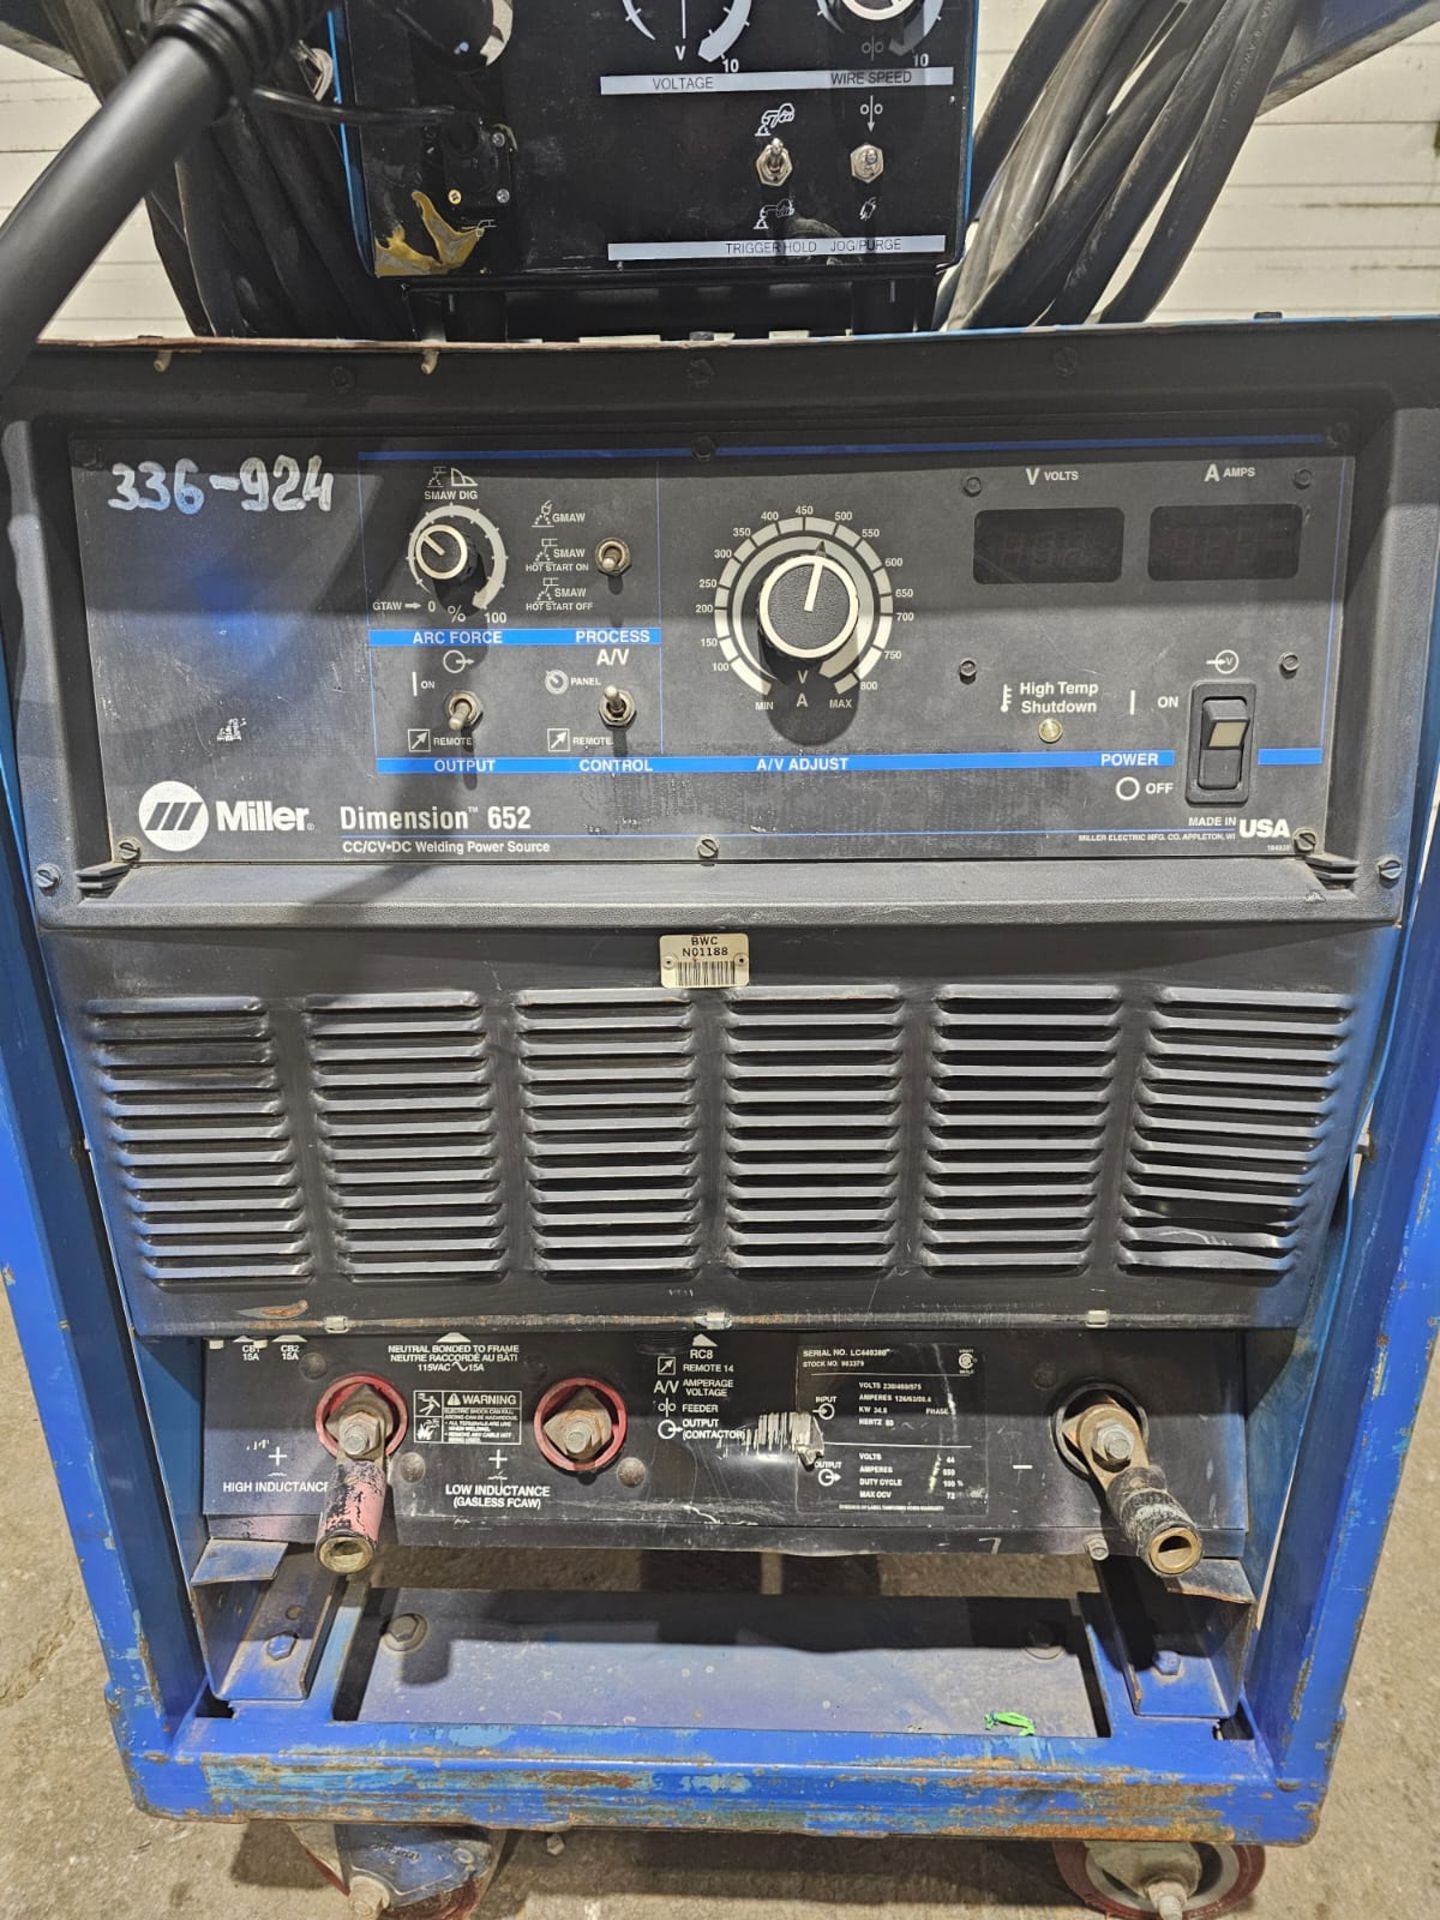 Miller Dimension 652 Mig Welder 650 Amp Mig Tig Stick Multi Process Power Source with 22A Wire - Image 2 of 8